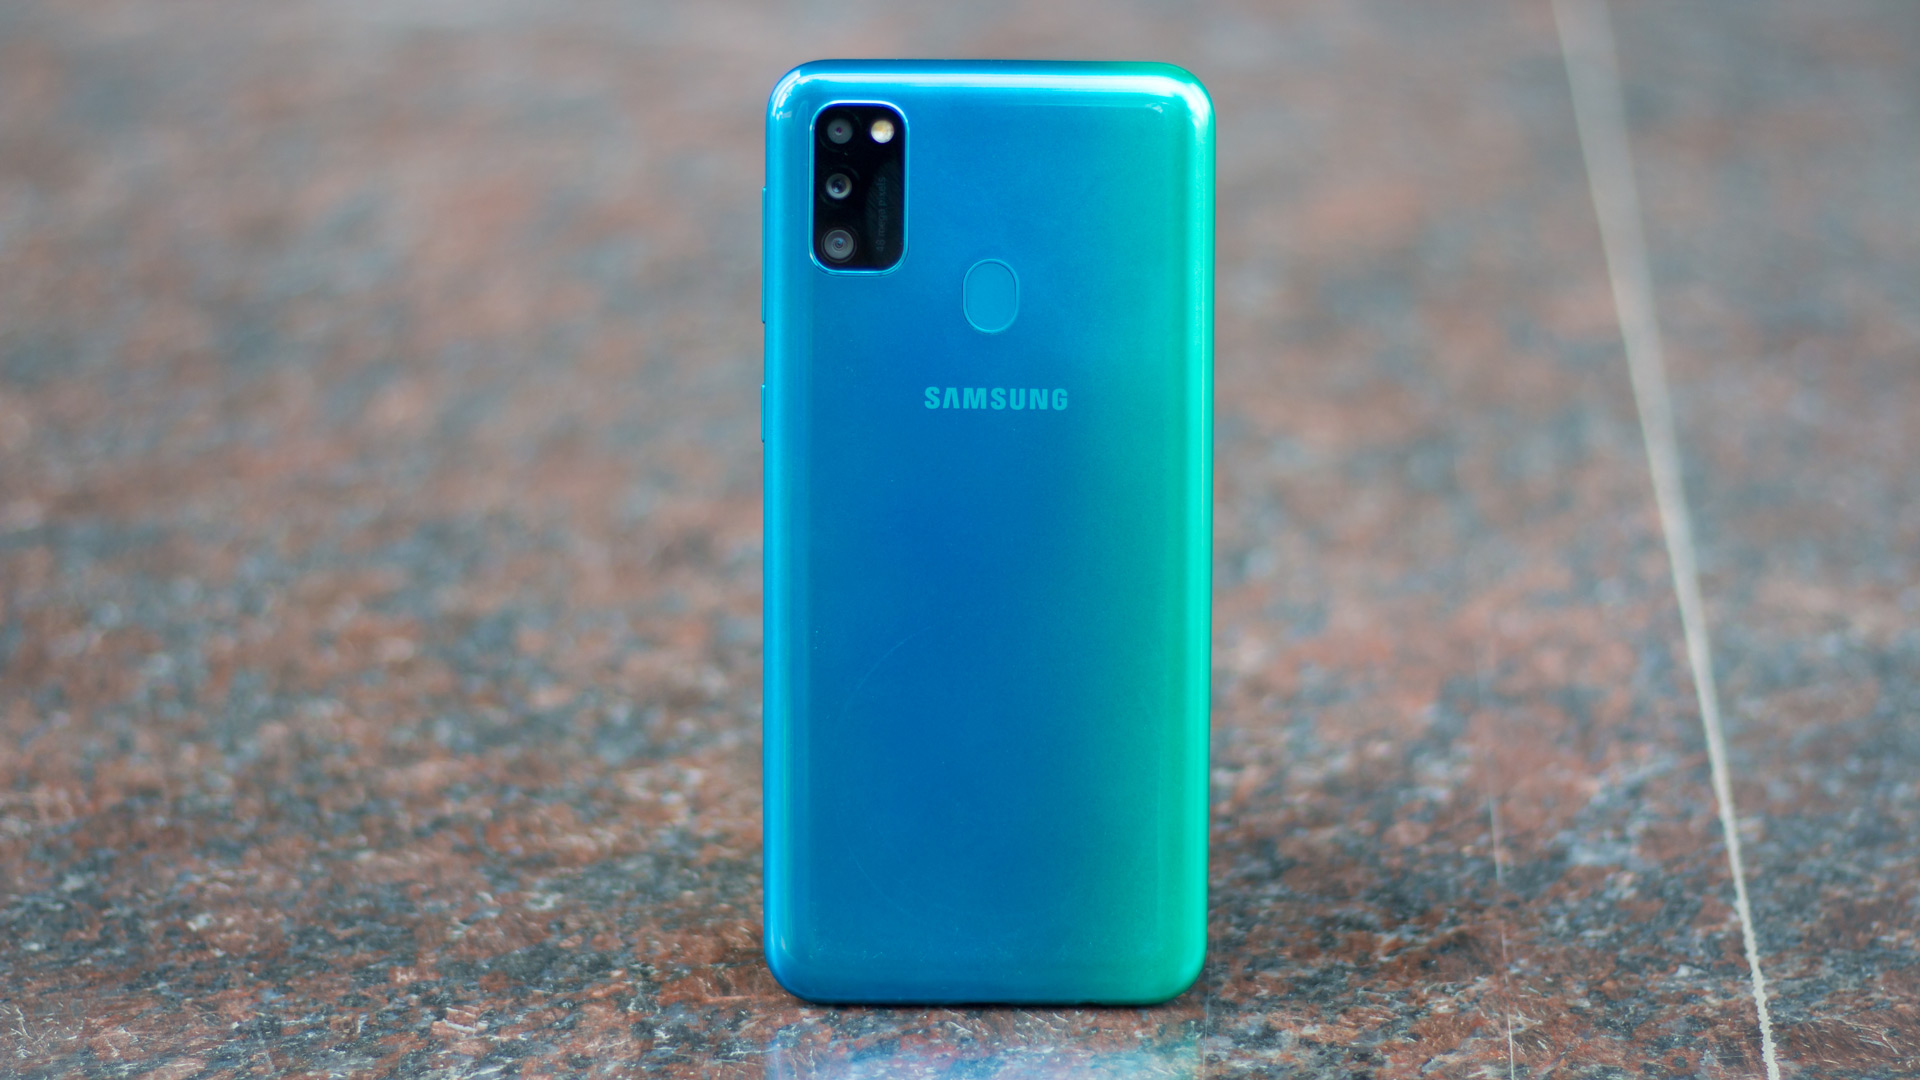 Samsung could be way ahead of schedule with Android 10 for Galaxy M30s